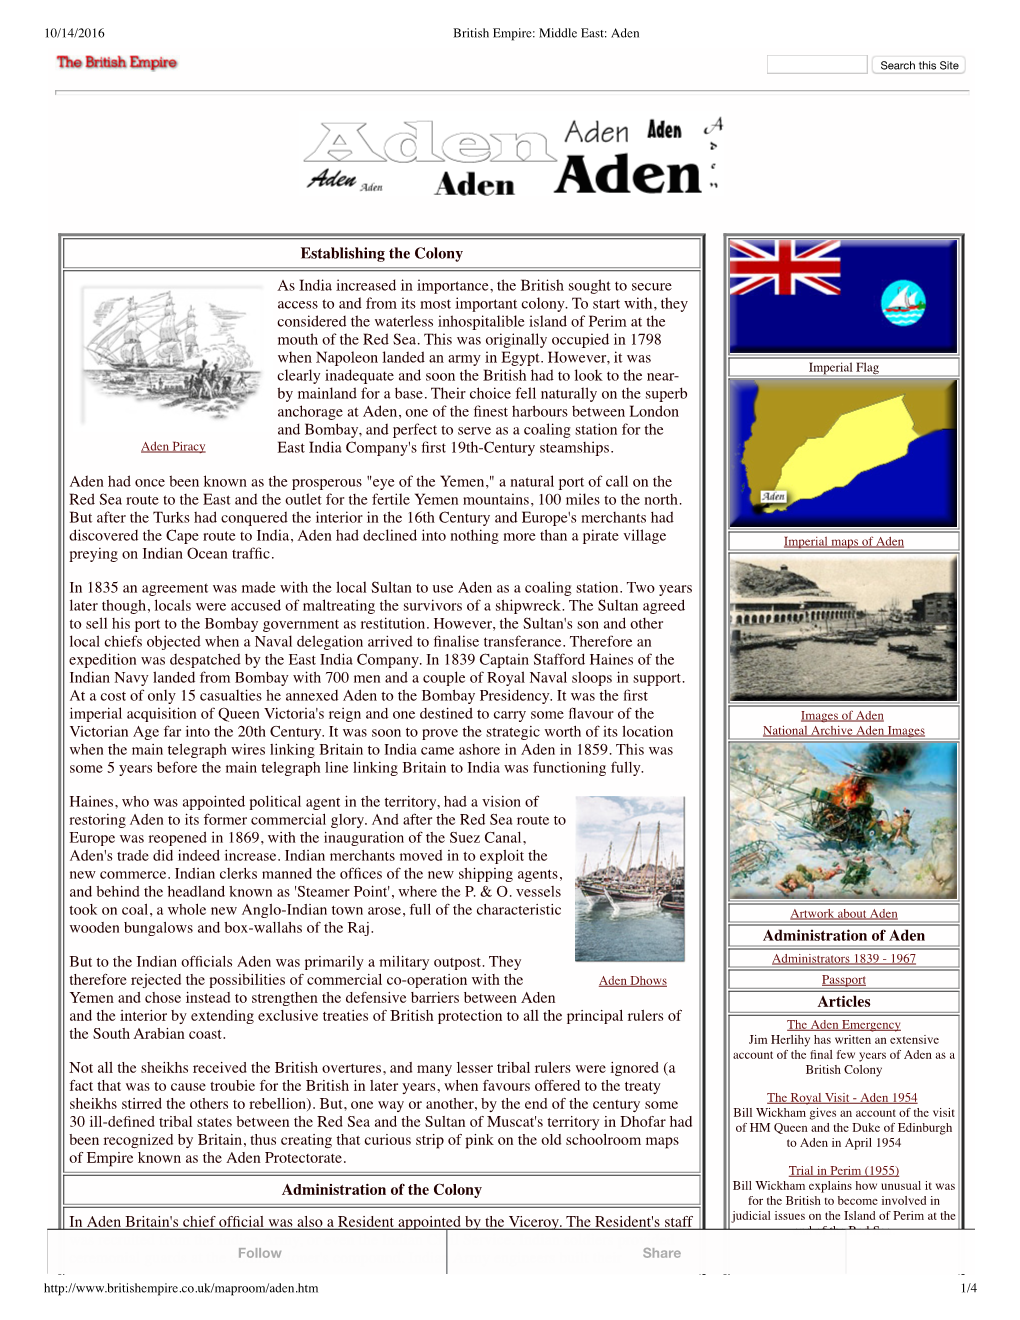 British Empire: Middle East: Aden